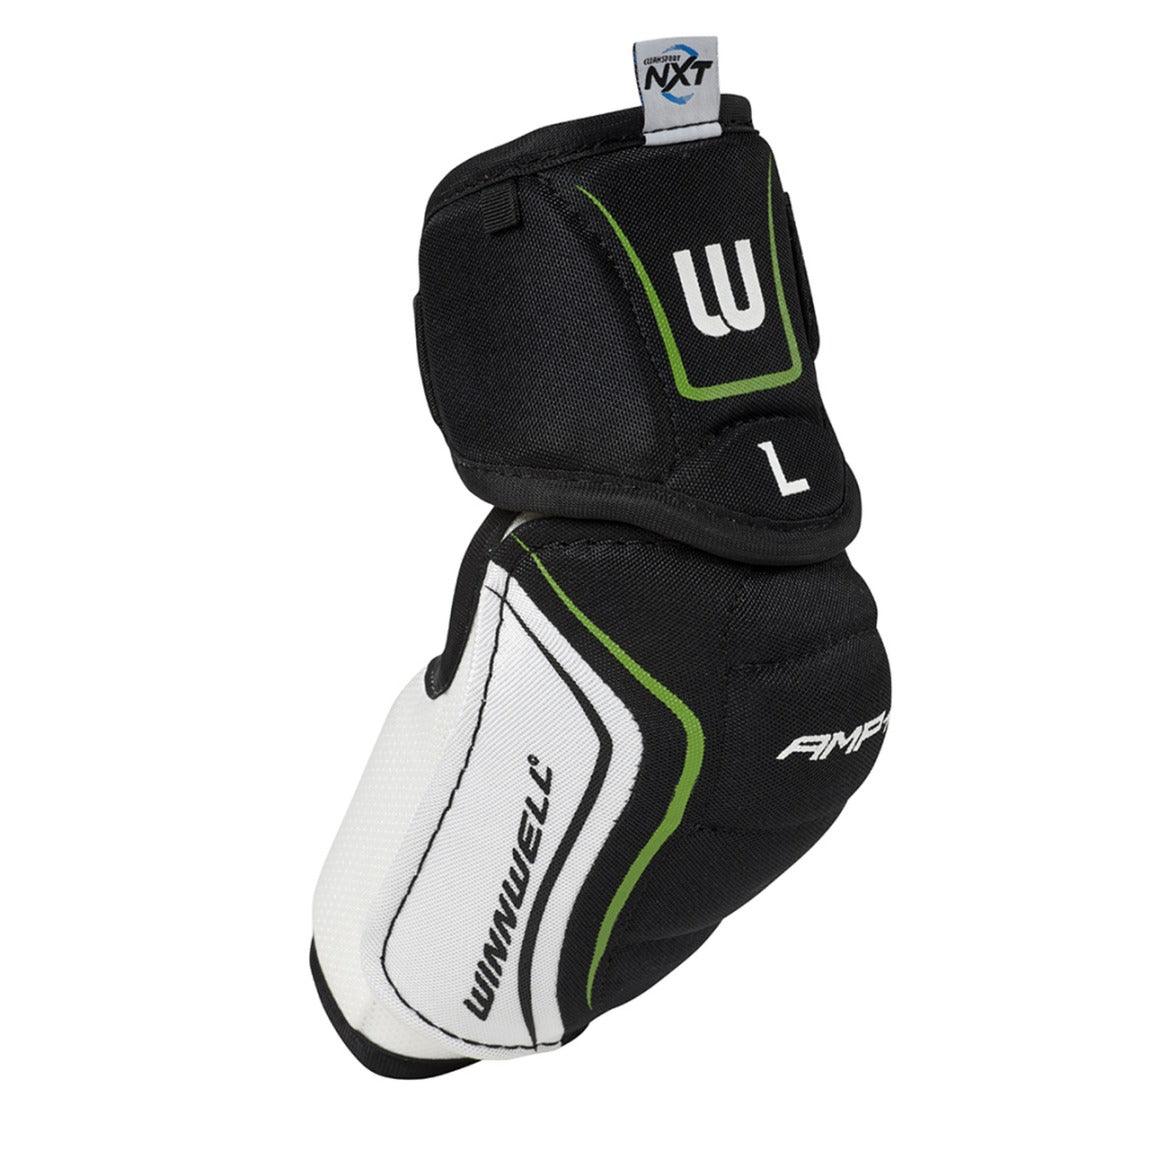 AMP700 Elbow Pad - Junior - Sports Excellence